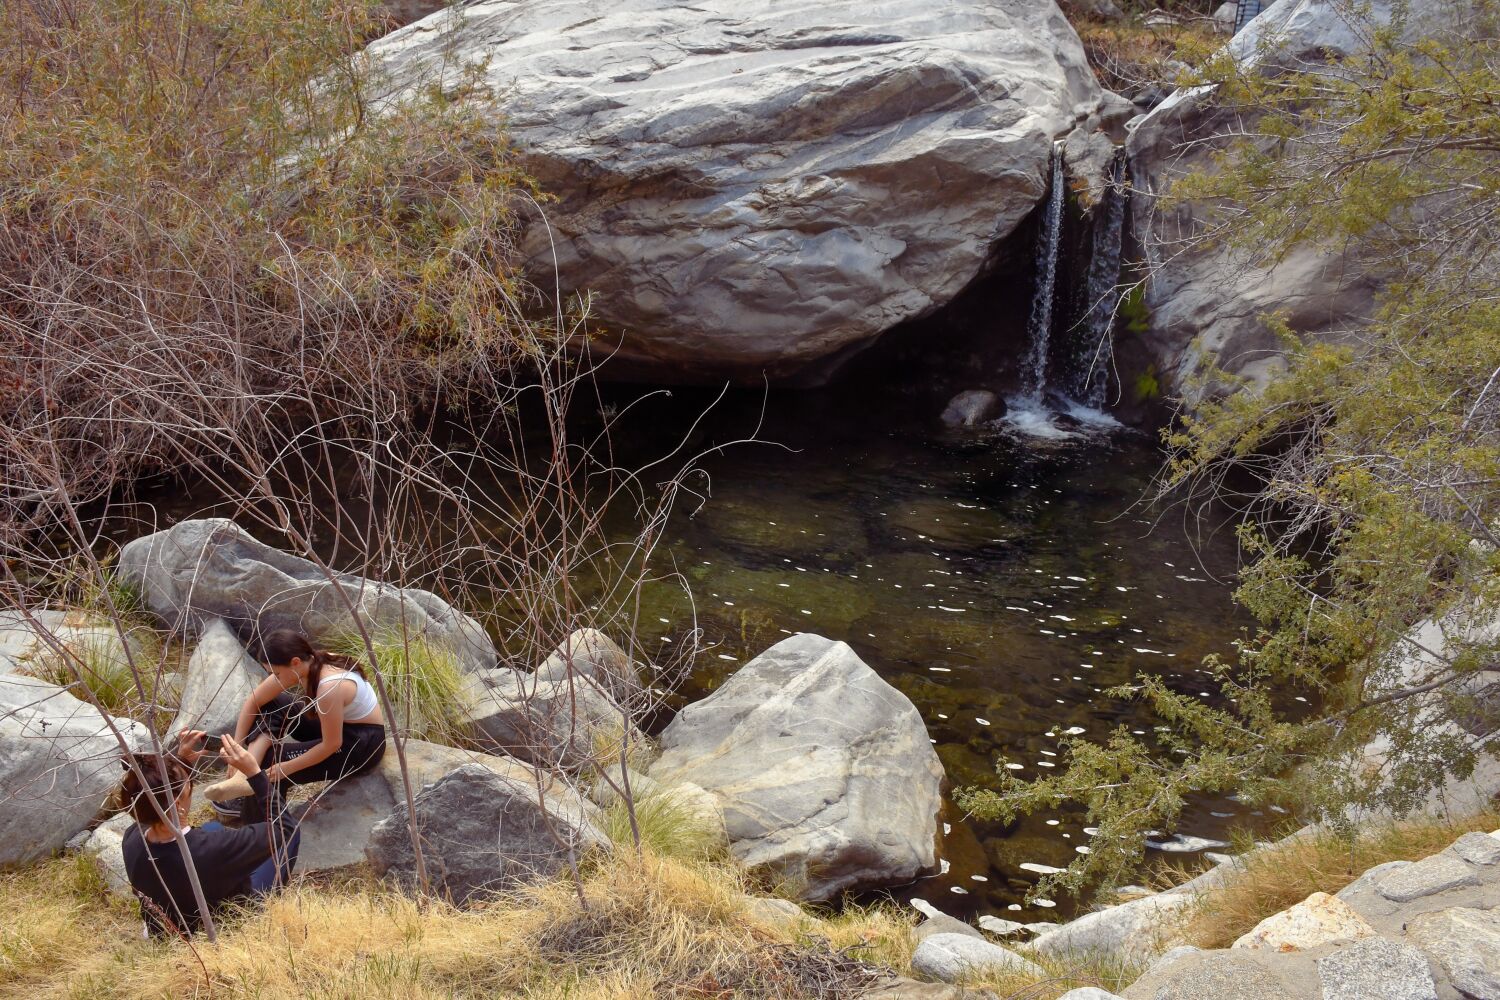 These Palm Springs hiking trails take you through a lush oasis — and into California history